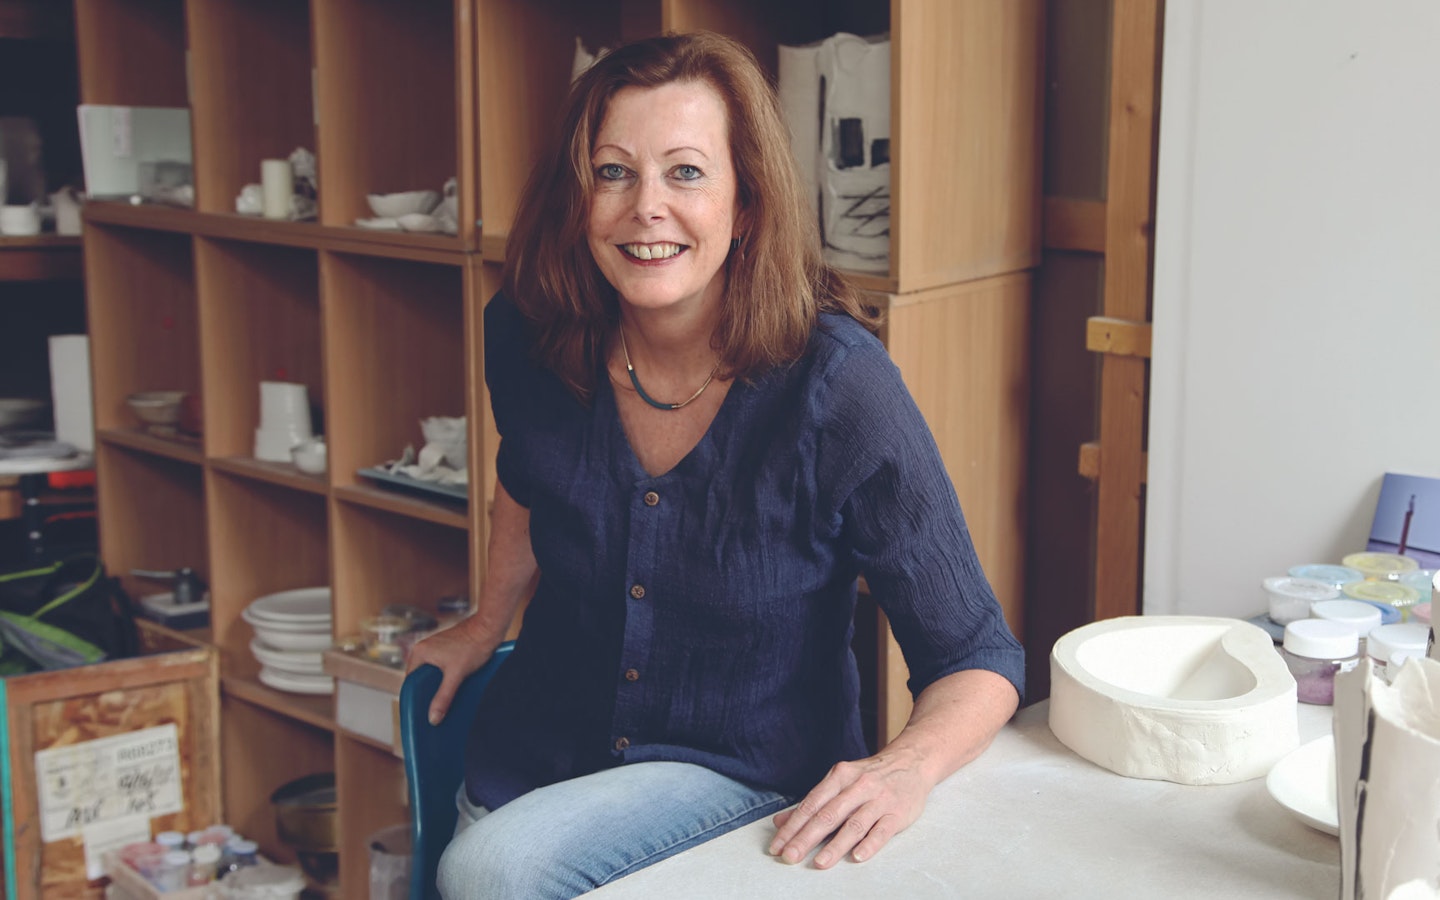 Master ceramicist Sally specializes in porcelain paper clay.